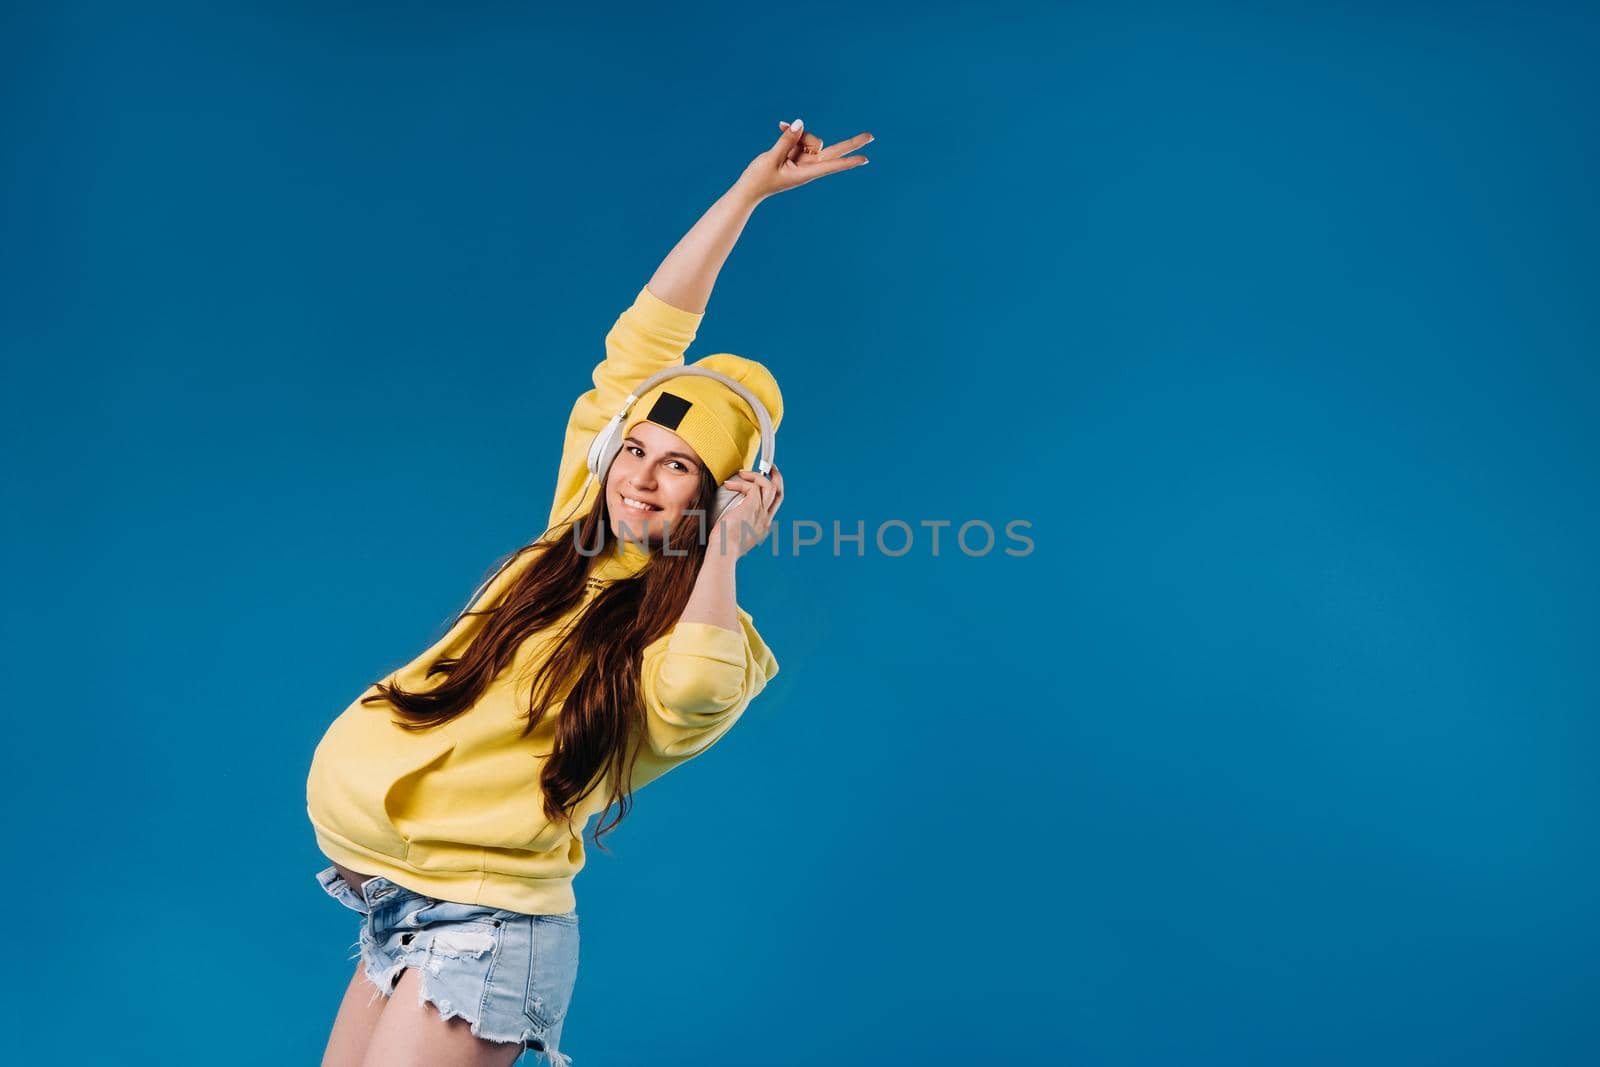 A pregnant girl in a yellow jacket and headphones stands on a blue background.